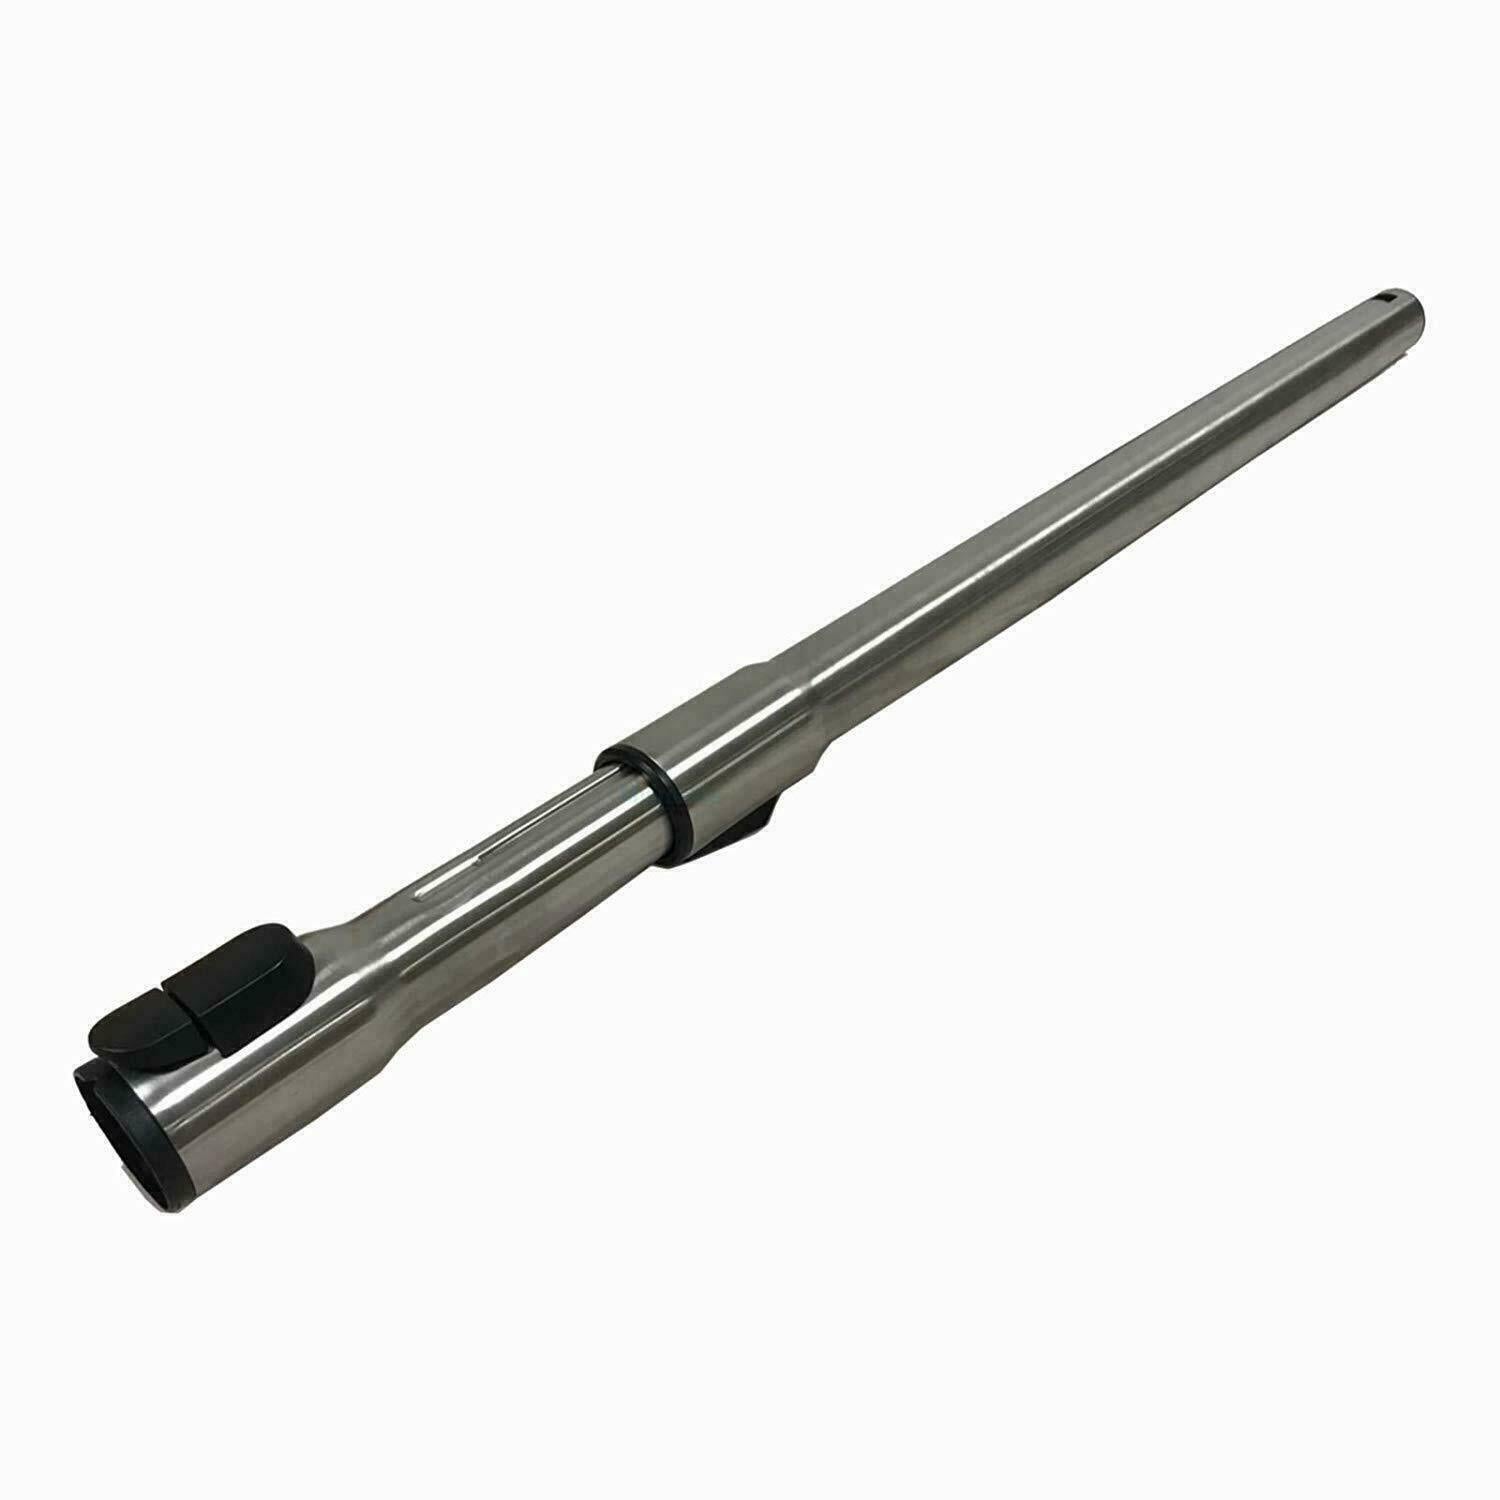 Telescopic Extension Tube Pipe Rod For Miele S5710 S5711 S5760 S5761 Sparesbarn